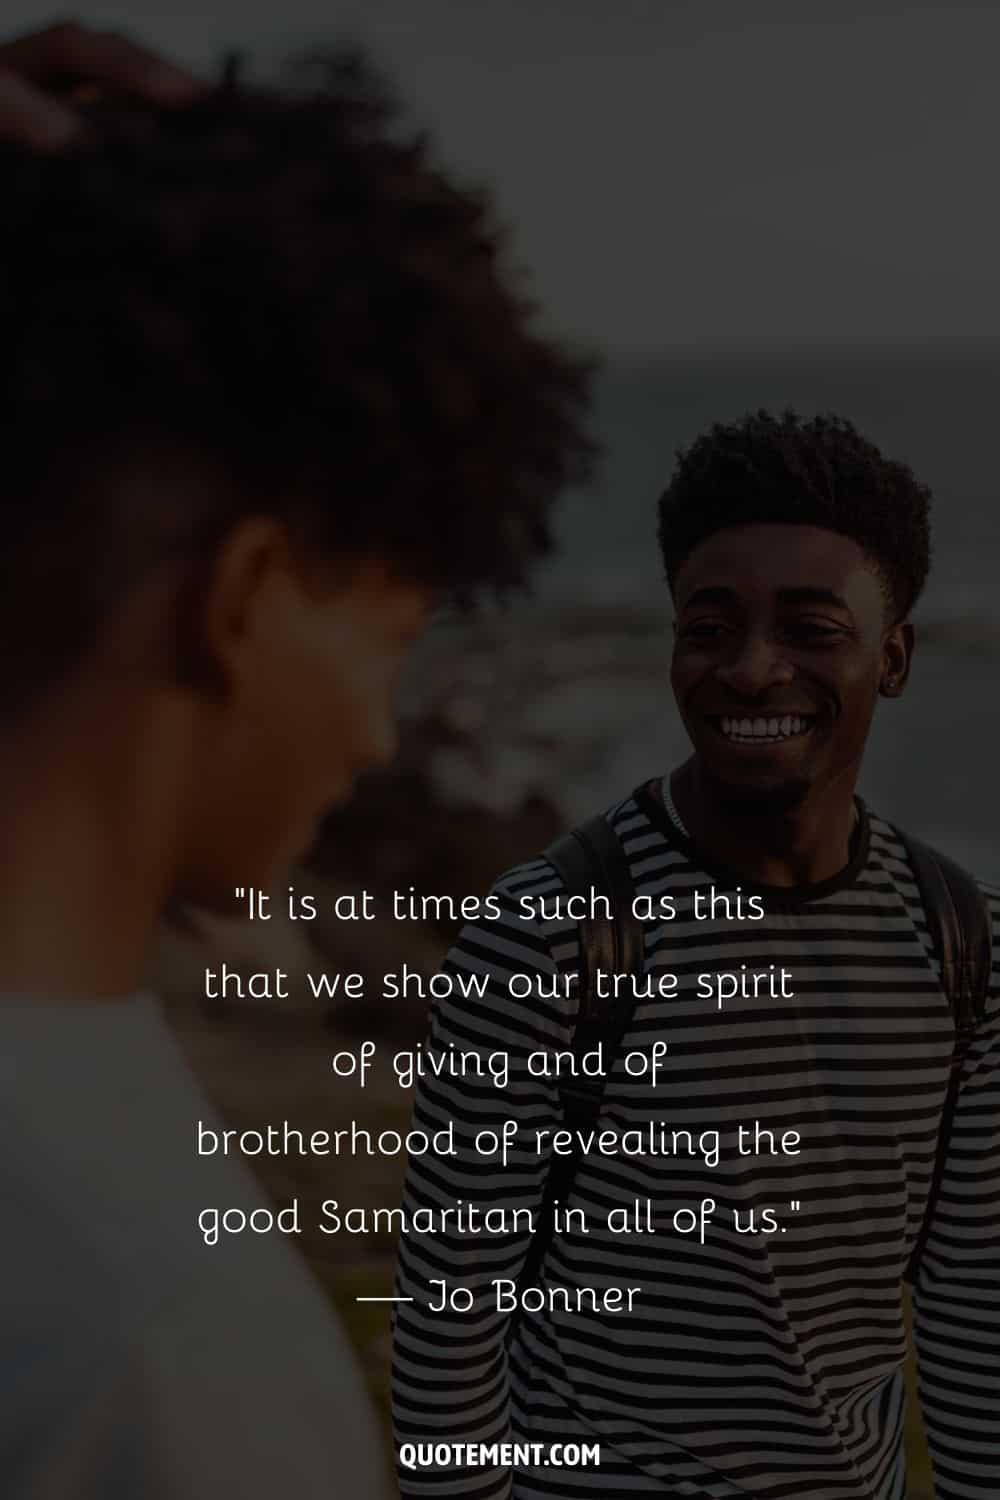 “It is at times such as this that we show our true spirit of giving and of brotherhood of revealing the good Samaritan in all of us.” — Jo Bonner